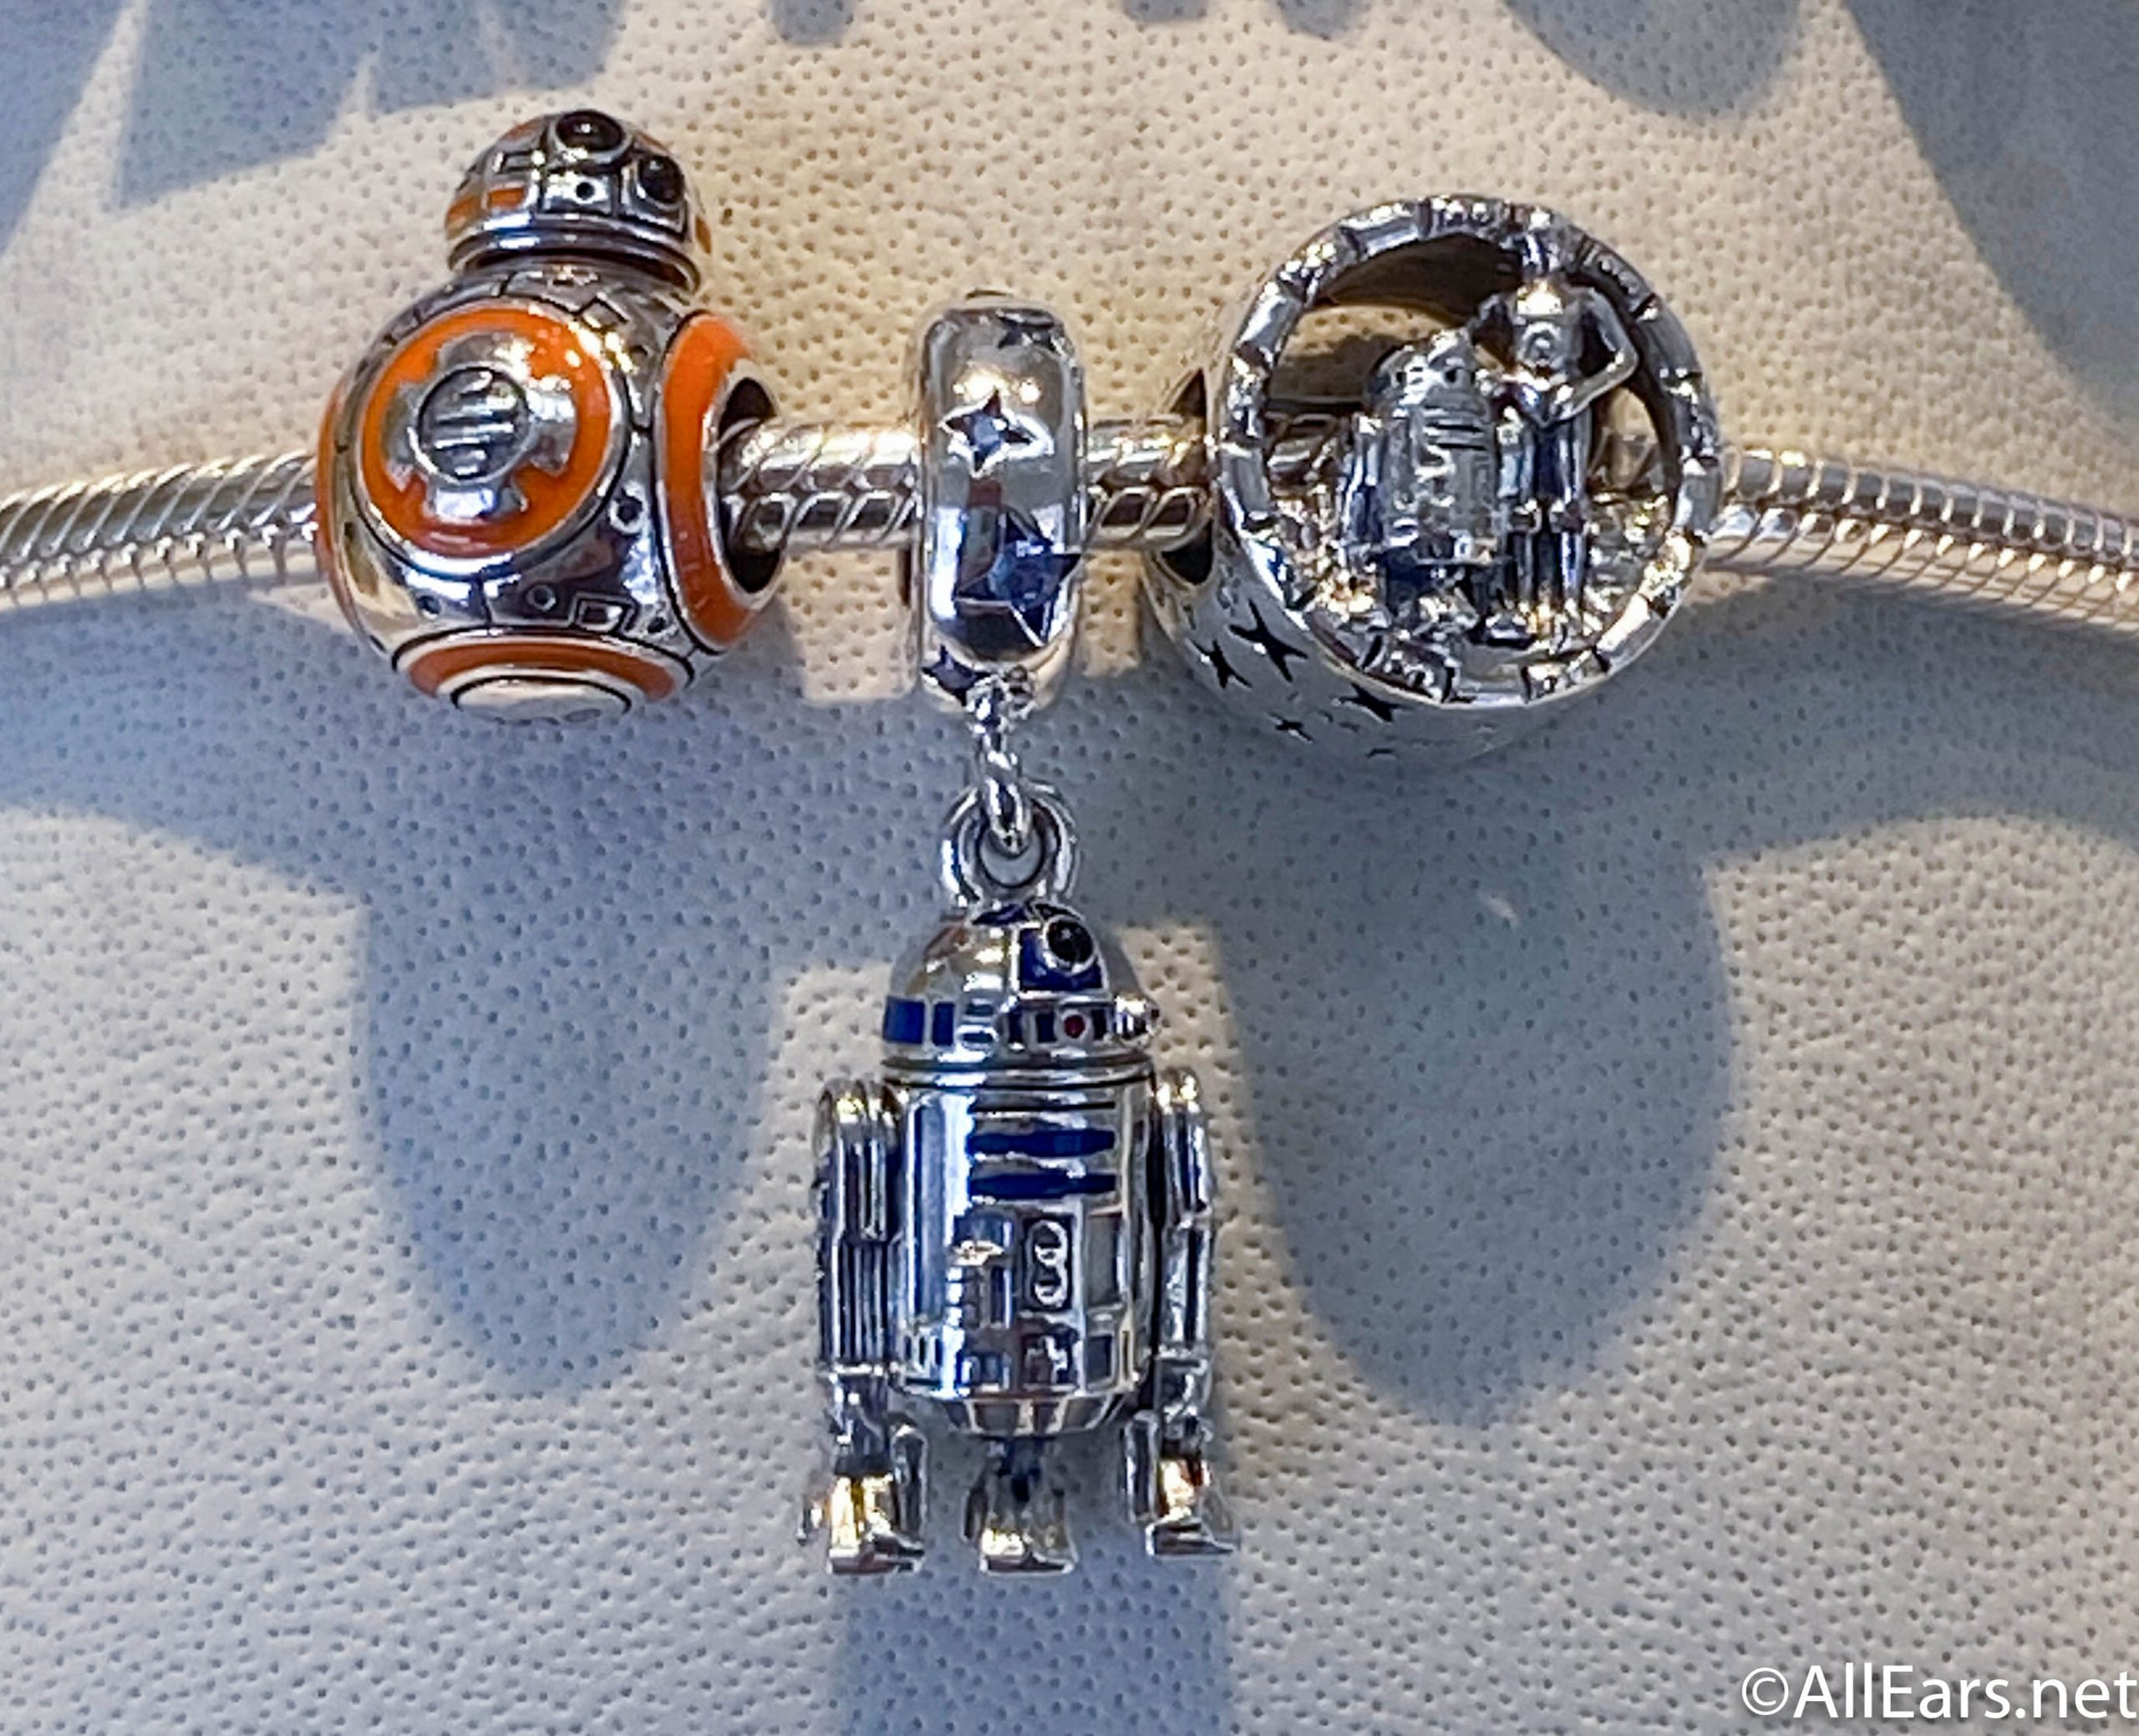 PHOTOS: The Force is Strong With These Pandora 'Star Wars' Charms ...